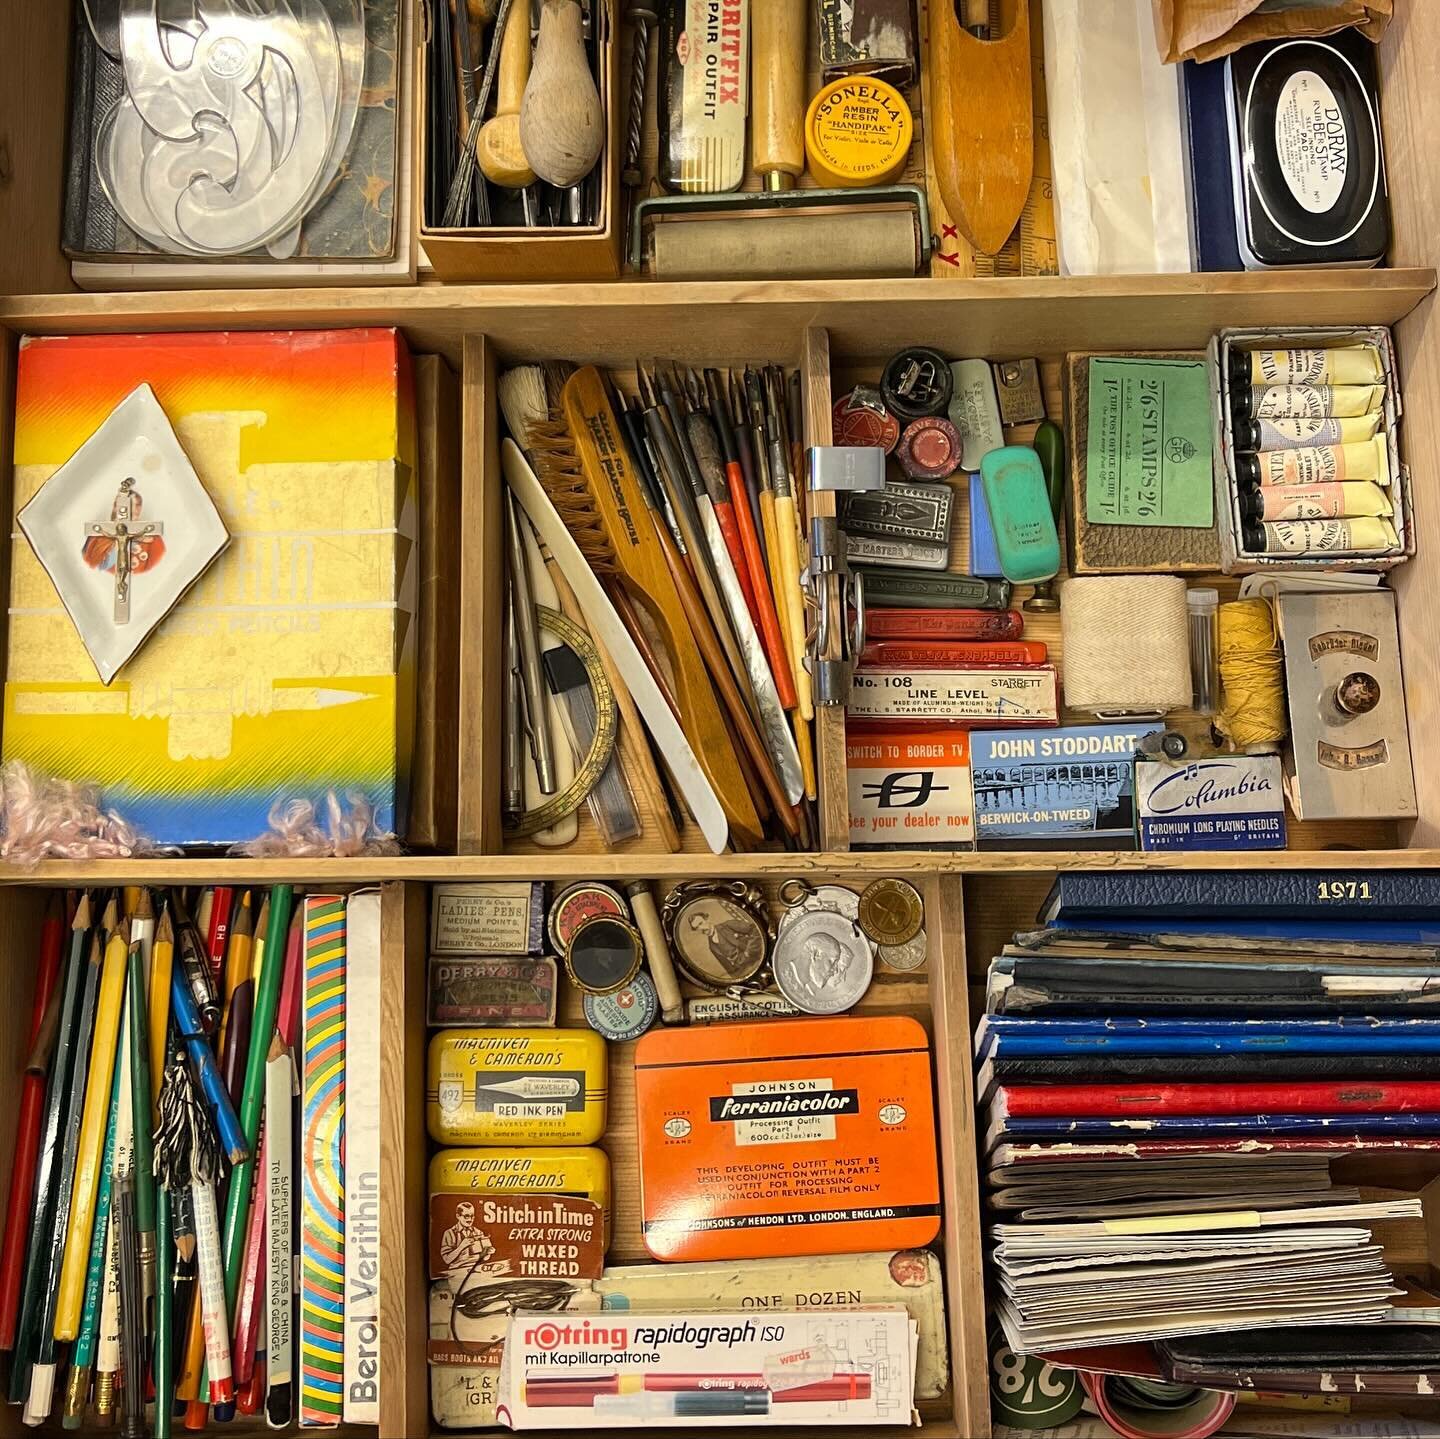 Top drawers of my plan chest. Filled with old items of stationery and ephemera. I have no real use for all these bits but I&rsquo;m always drawn to boxes filled with pens and pencils, nibs and boxes. 

I think in my mind one day I&rsquo;ll be called 